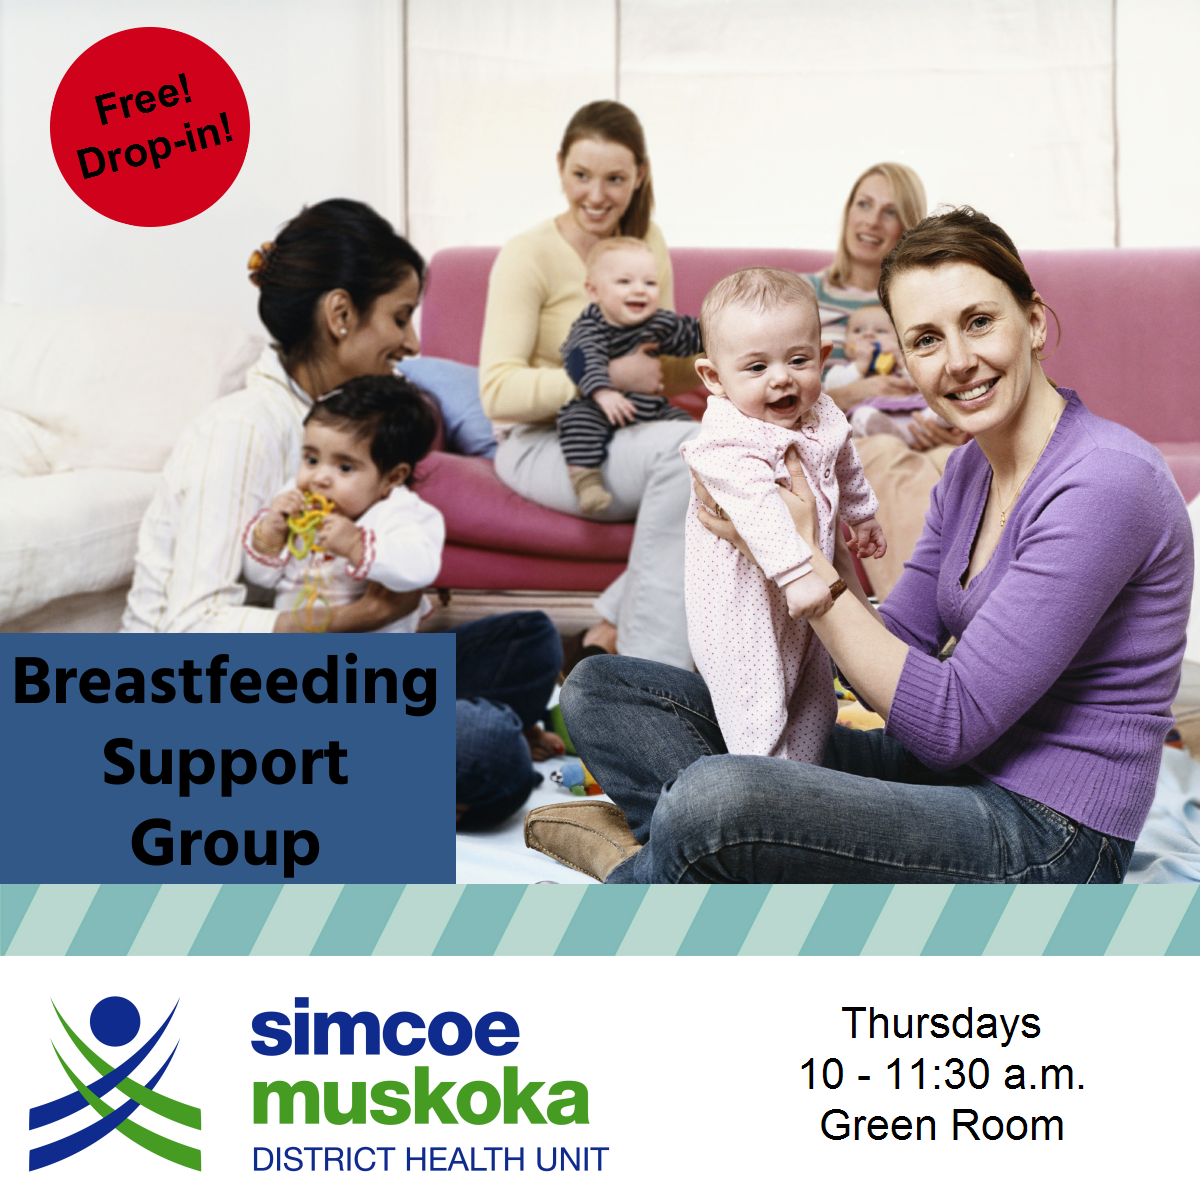 Group of women with babies: Breastfeeding Support Group: Thursdays, 10-11:30am in the Green Room, Free, Dropin